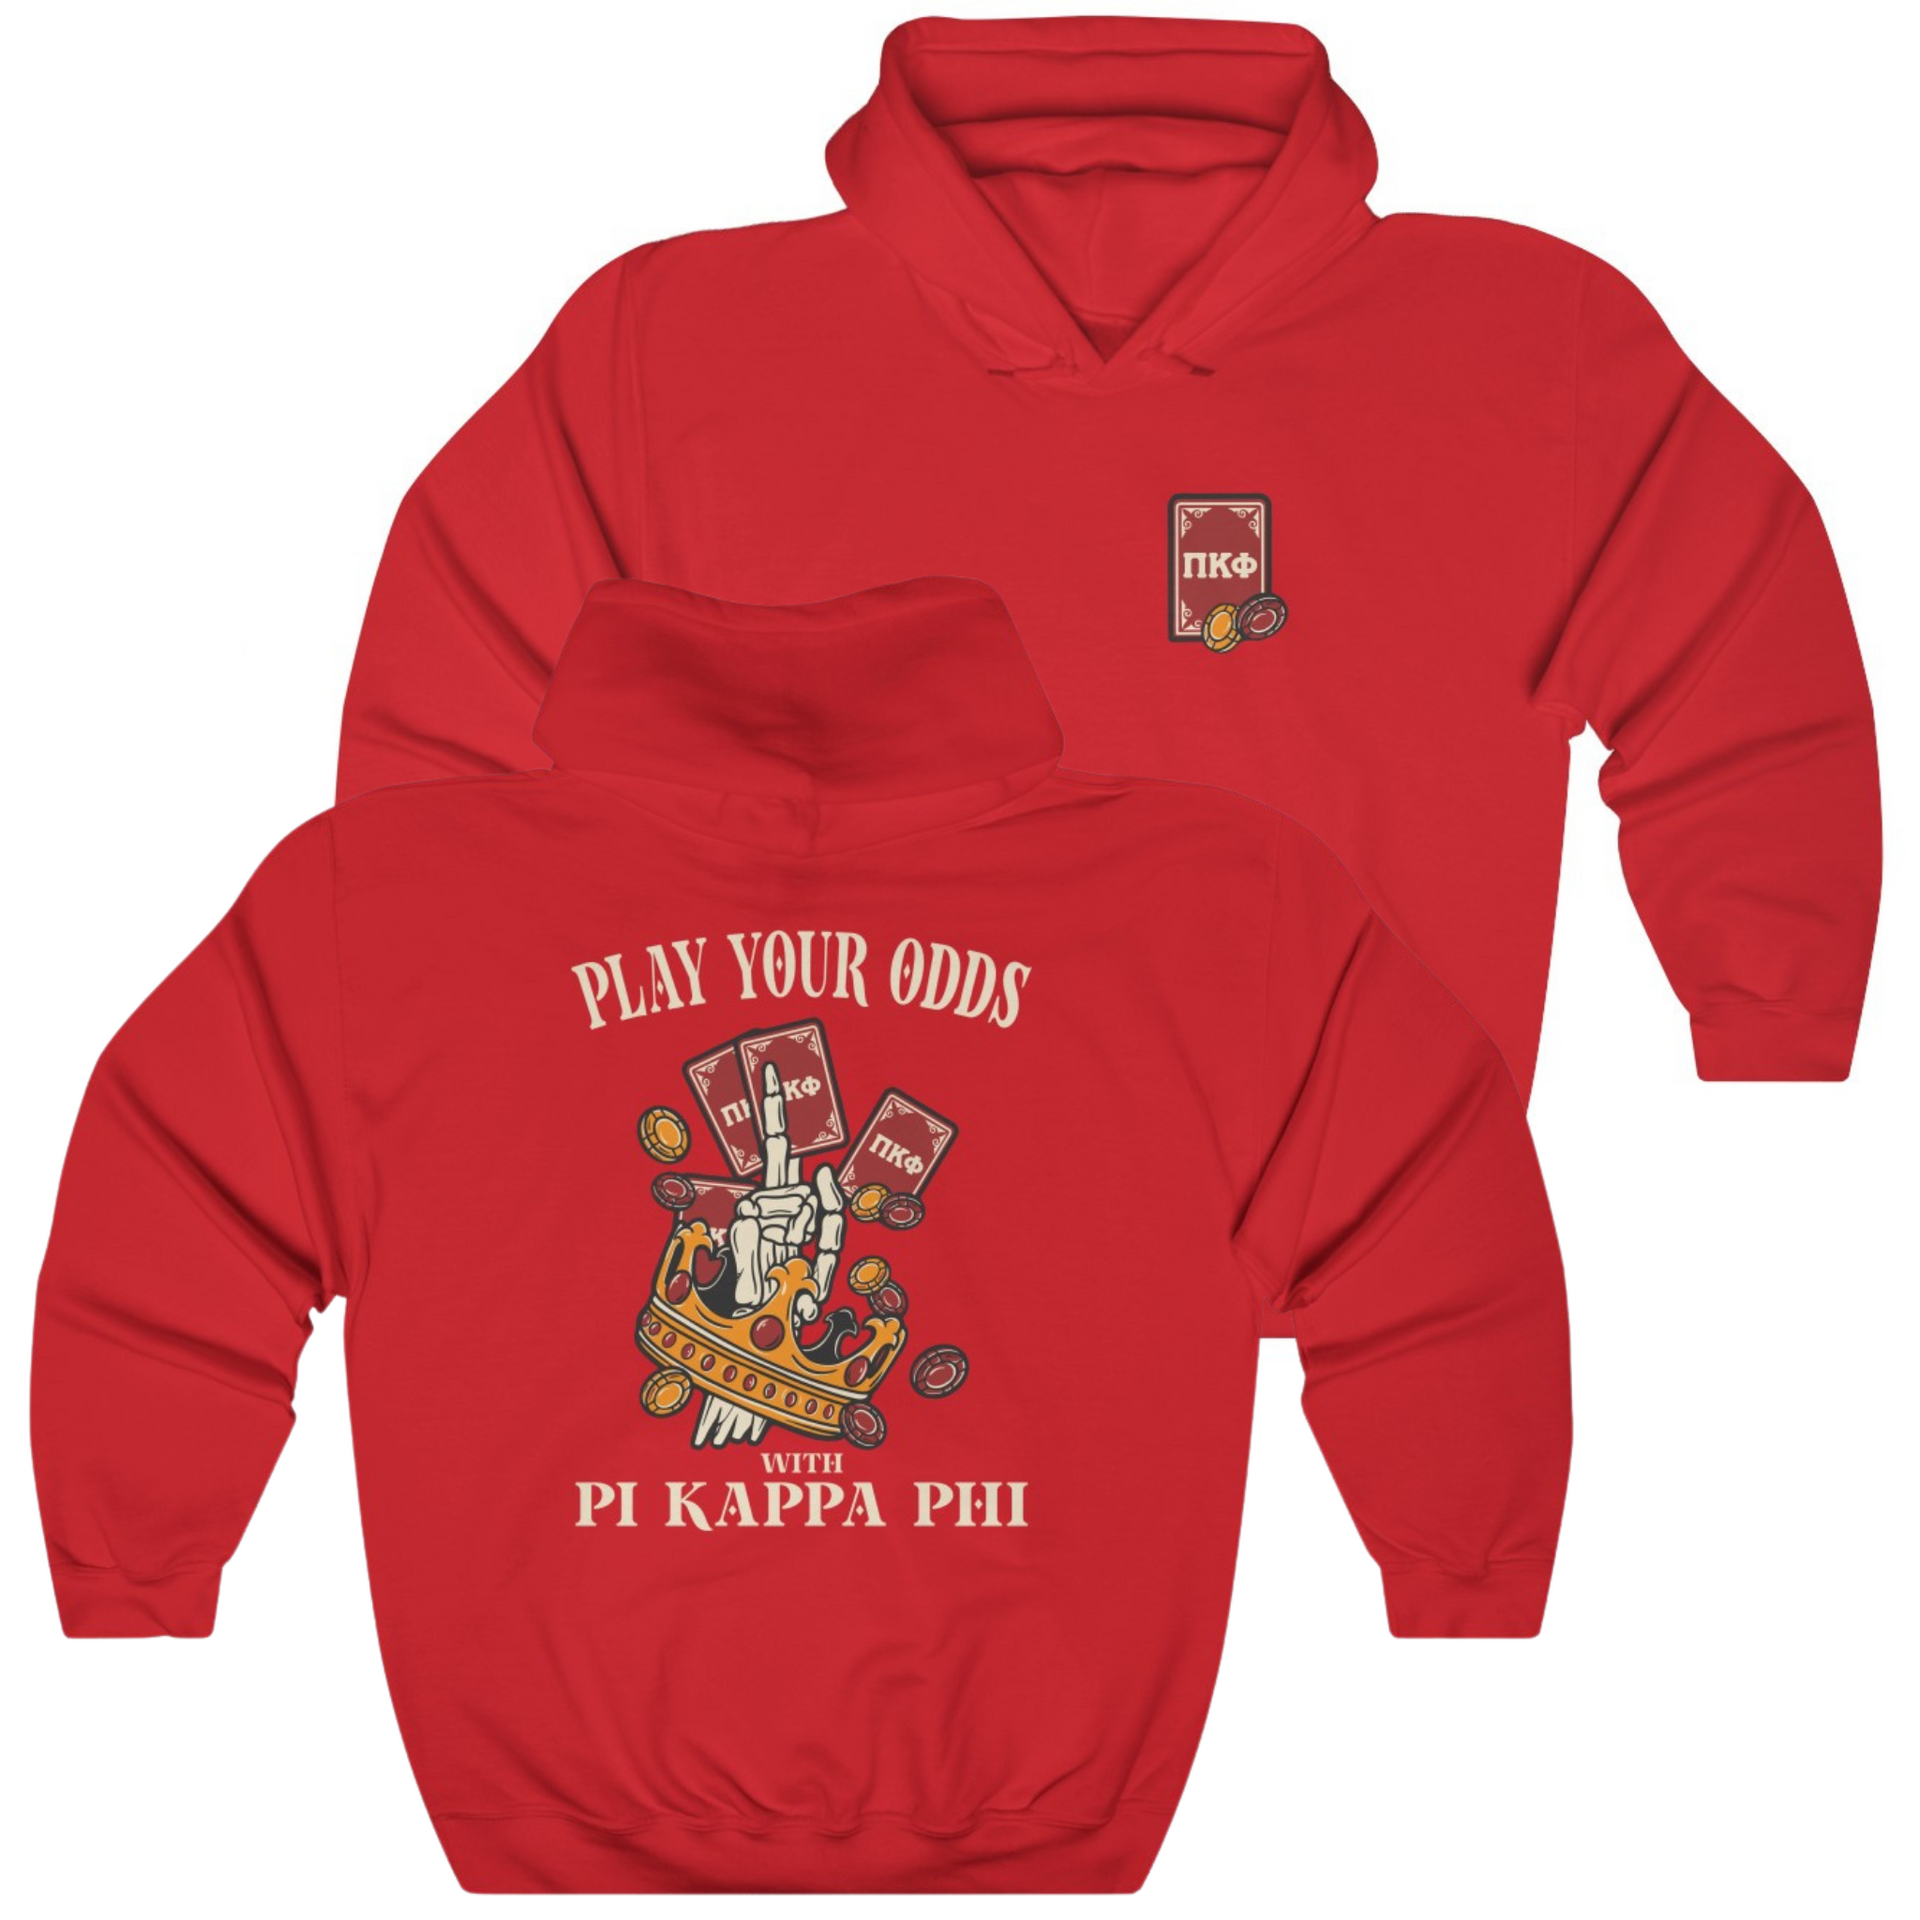 Red Pi Kappa Phi Graphic Hoodie | Play Your Odds | Pi Kappa Phi Apparel and Merchandise